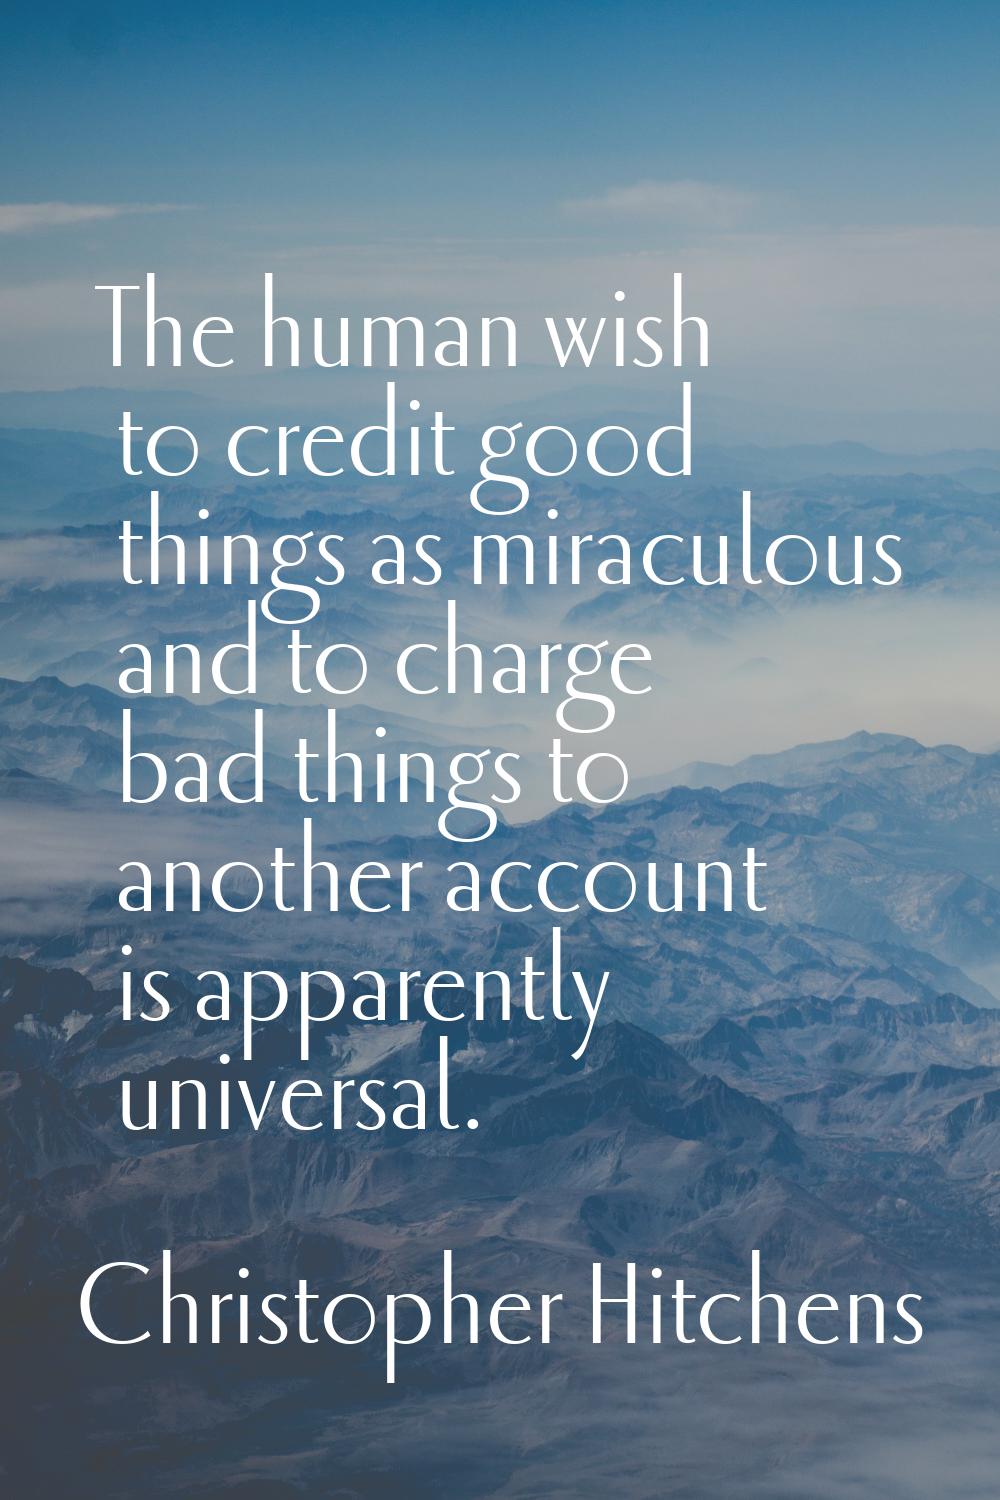 The human wish to credit good things as miraculous and to charge bad things to another account is a